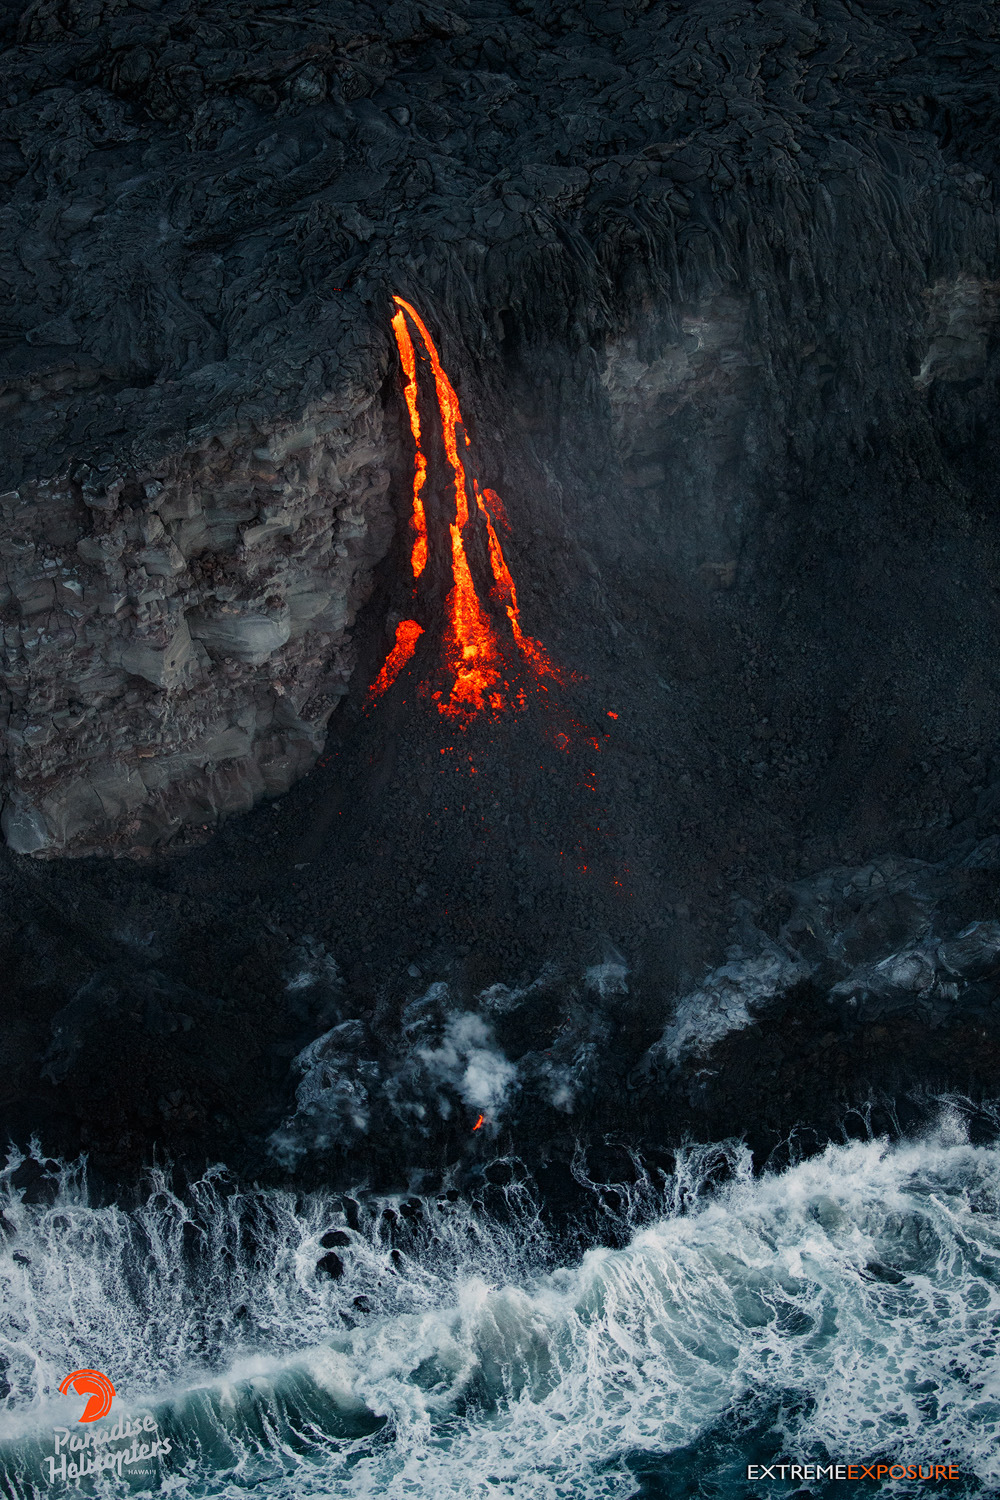 Lava transforms from pahoehoe to ‘a‘a as it cascades down the face of a sea cliff on the Kalapana coastline, building a new delta of land at its base. Paradise Helicopters photo.